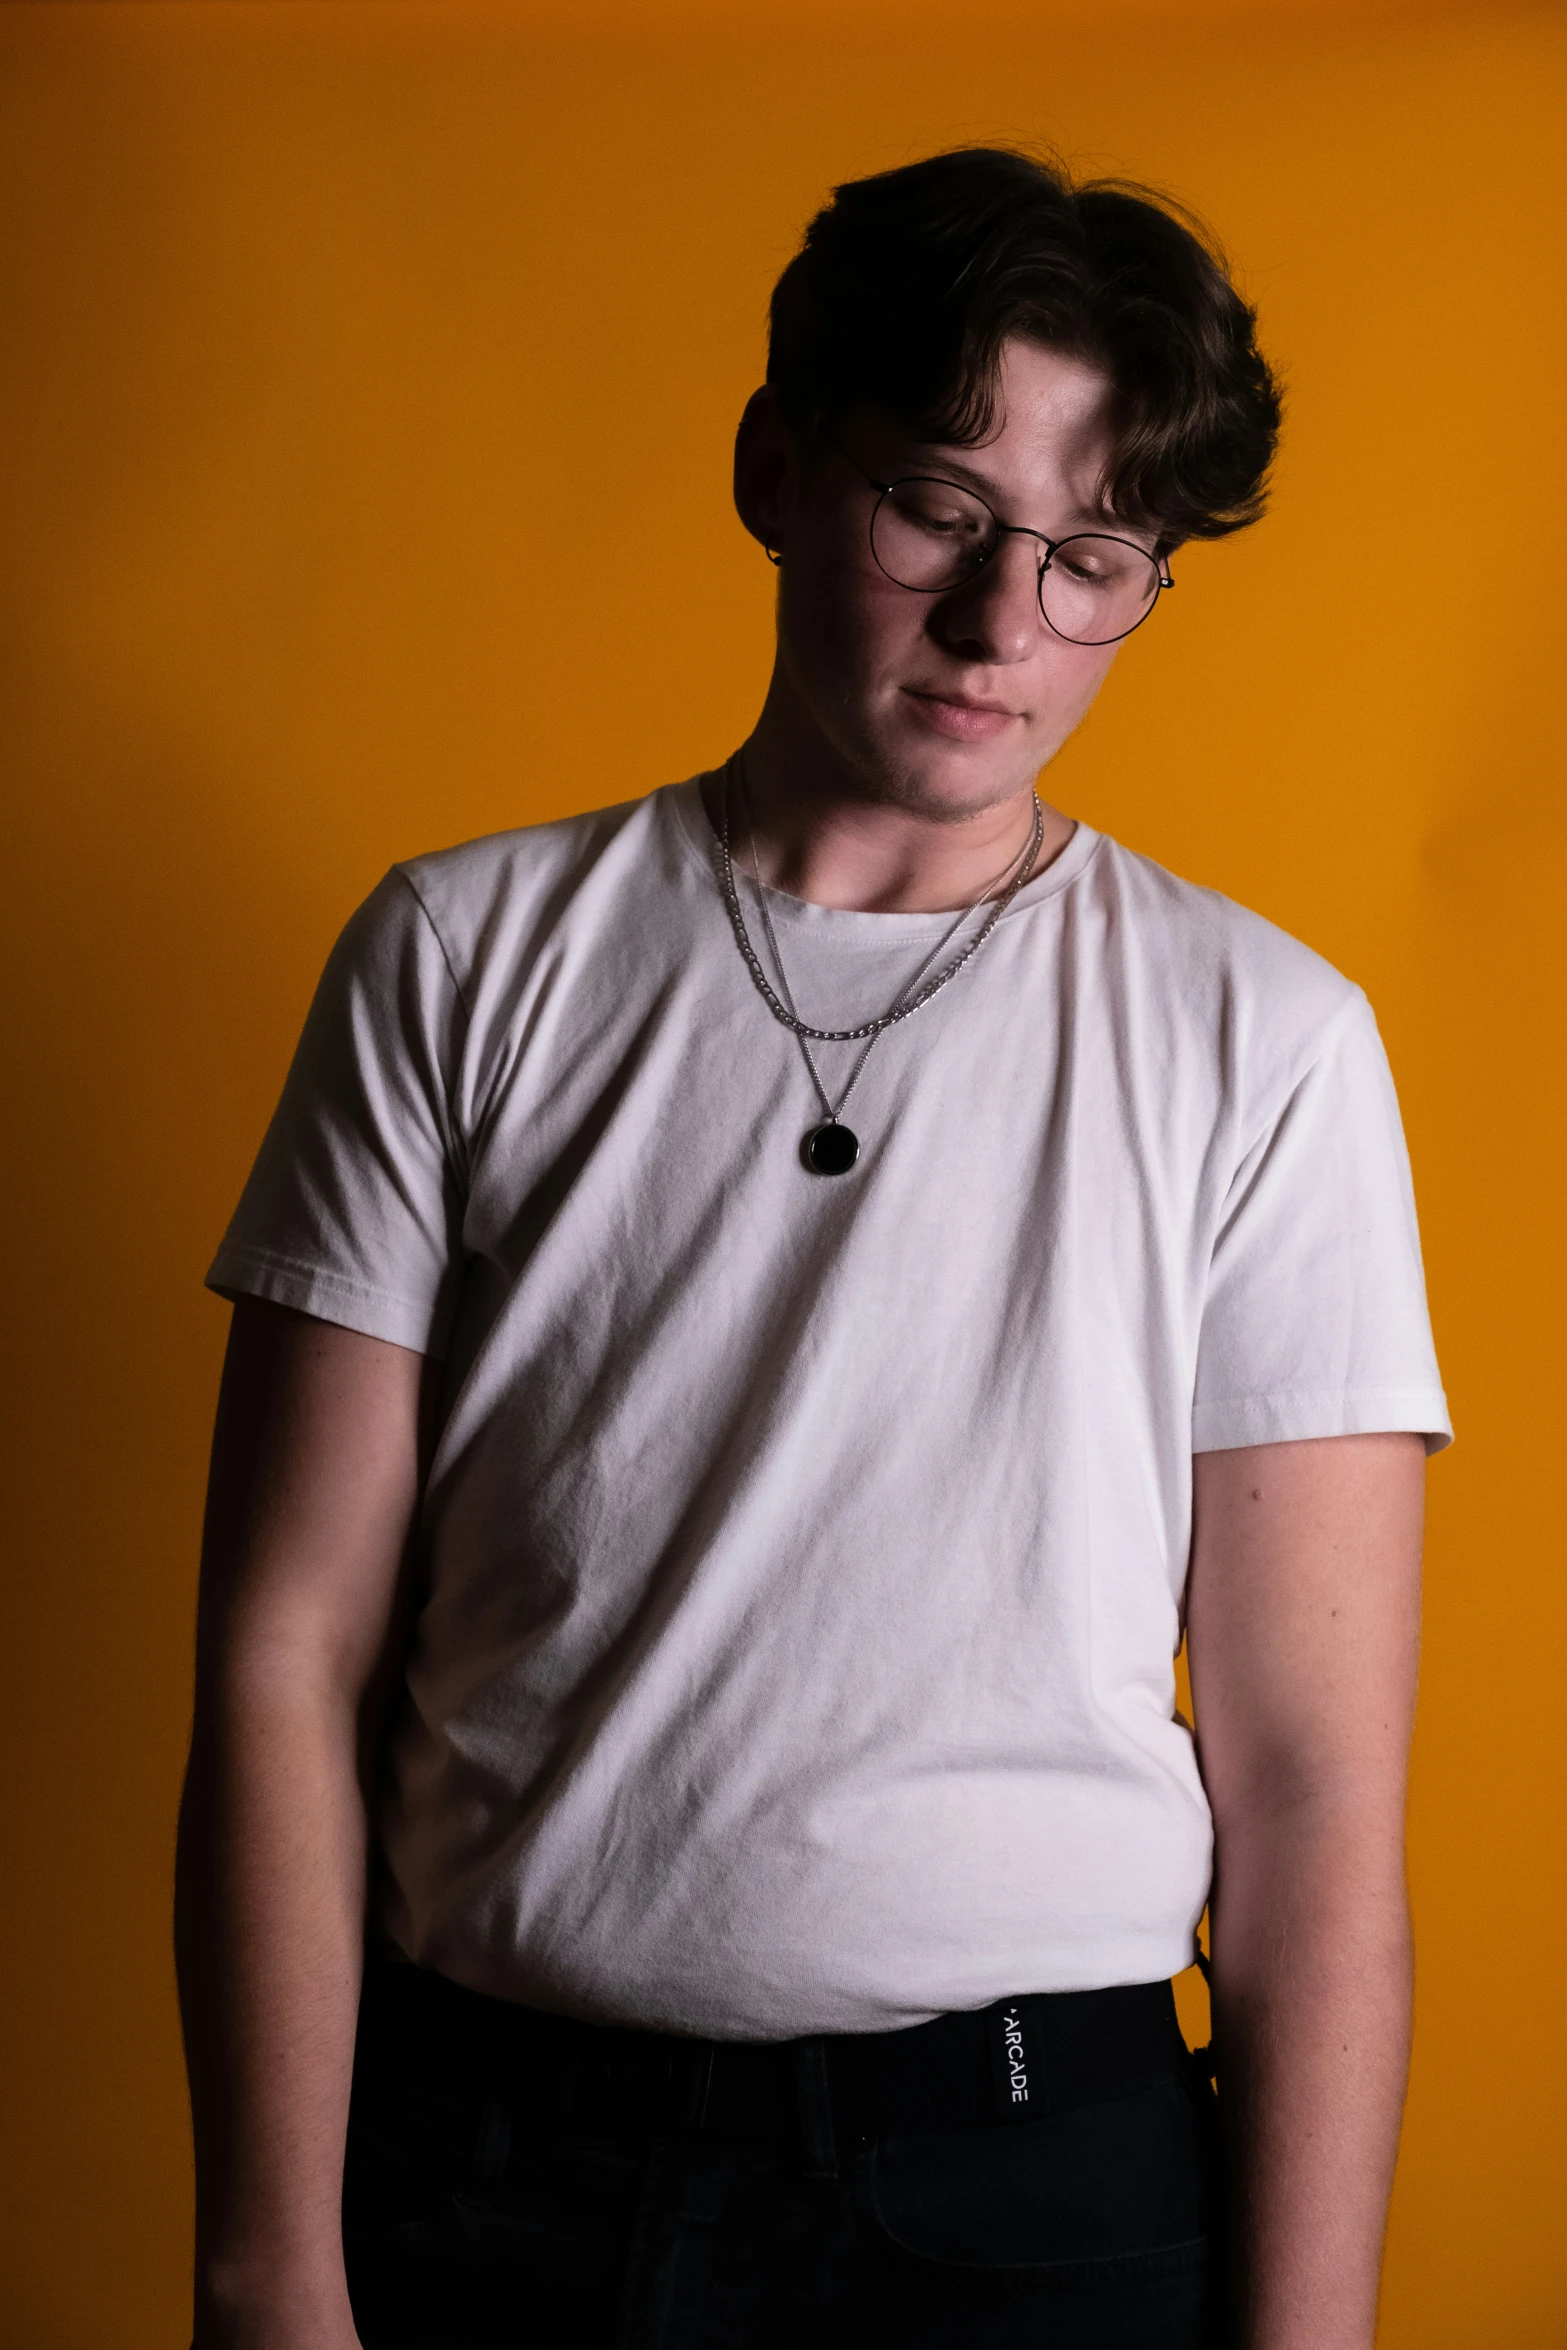 a boy with glasses standing against a yellow wall